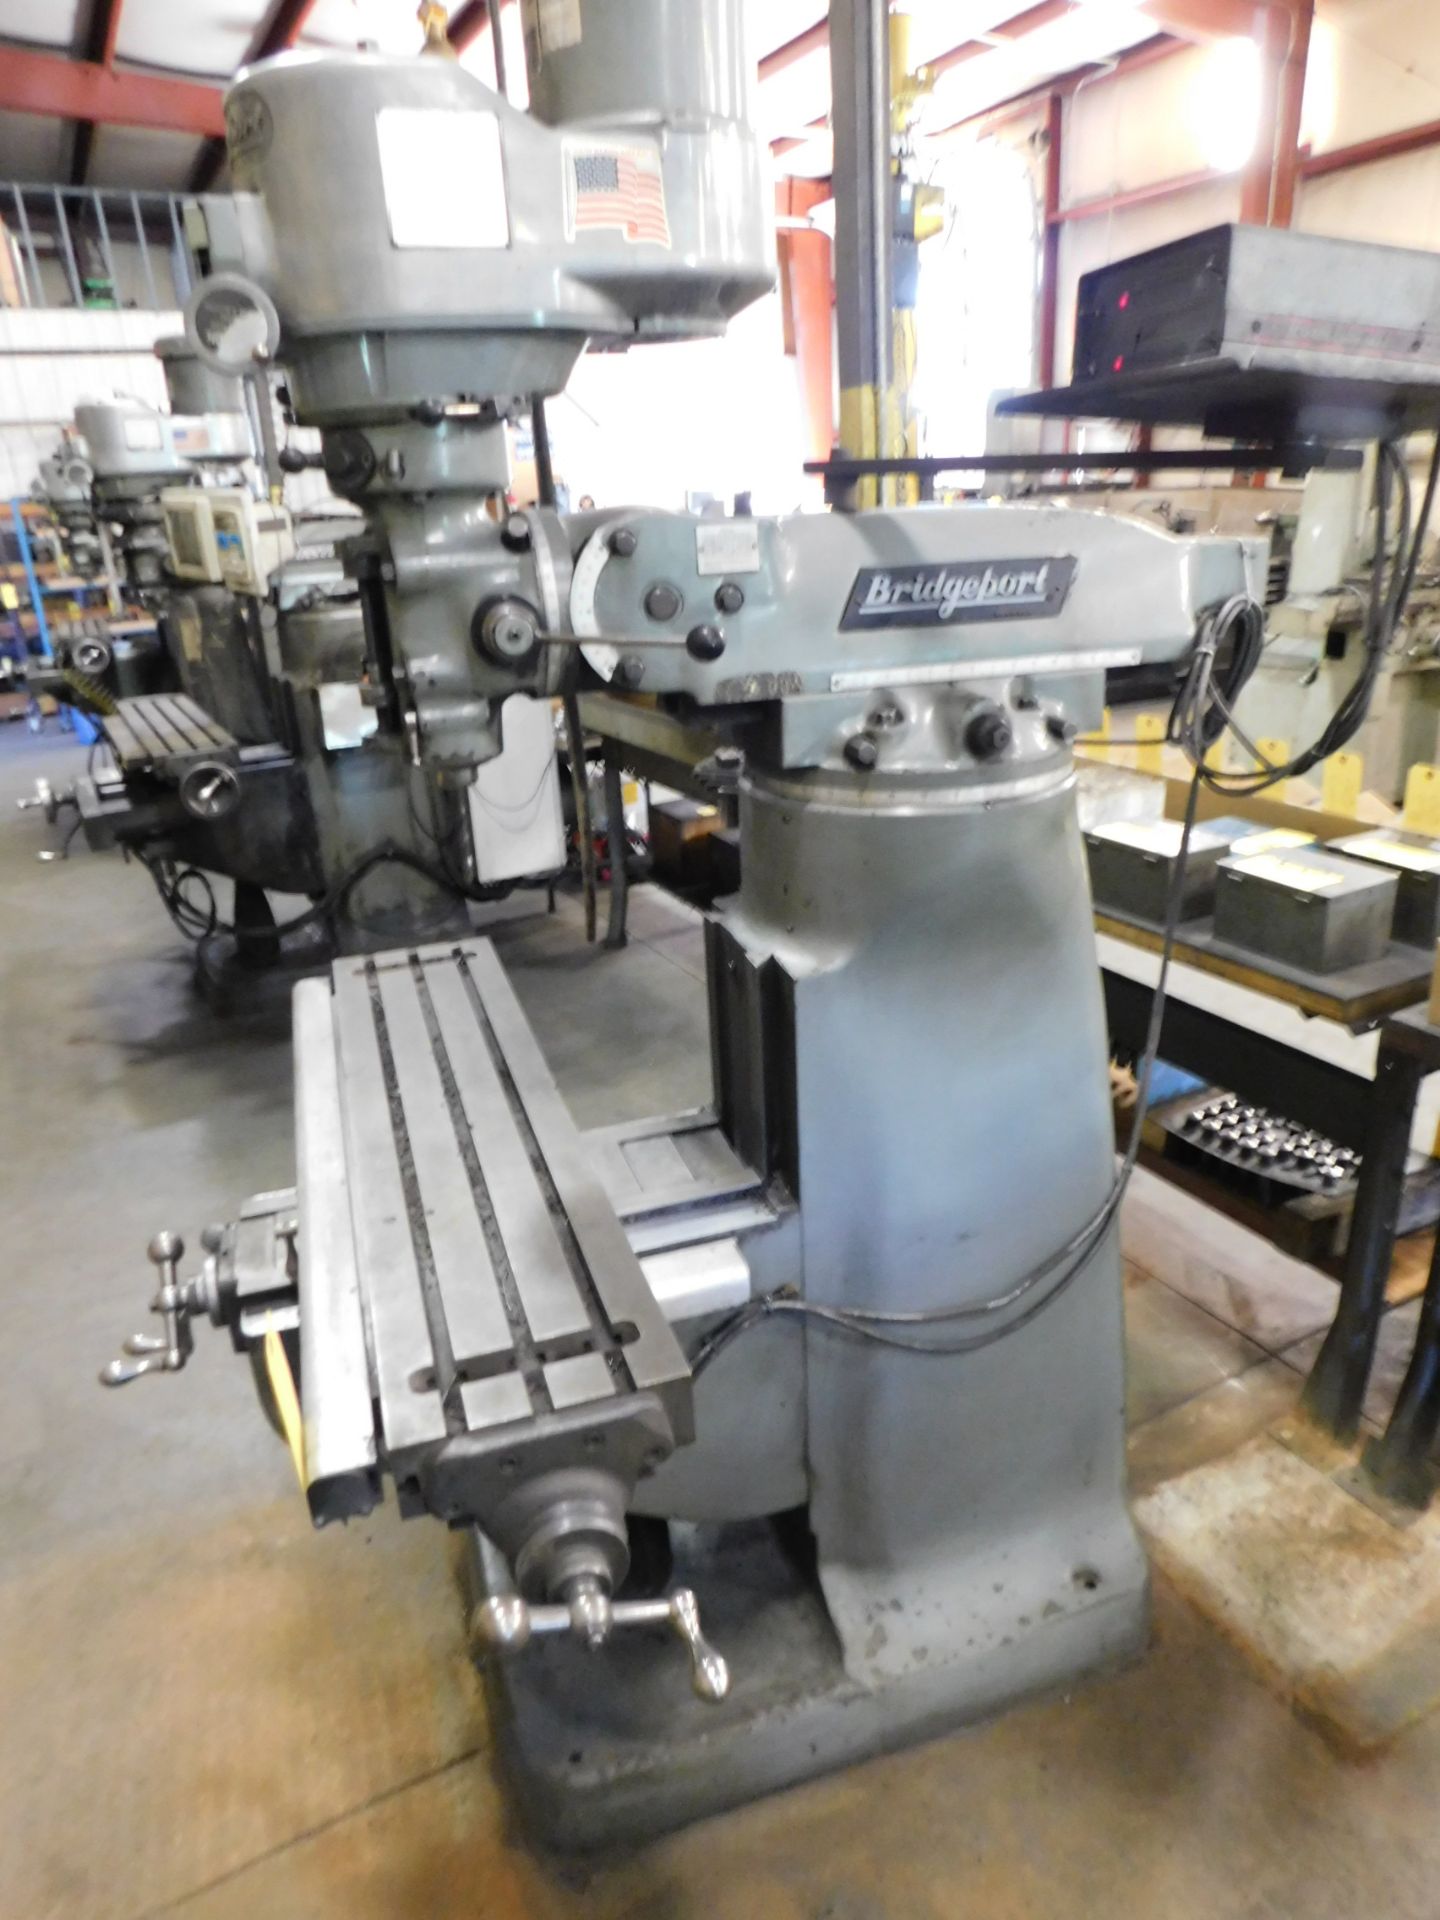 Bridgeport Series I, 2 HP Vertical Mill, s/n 12BR239284, 9” X 42” Table, Accurite D.R.O. - Image 11 of 11